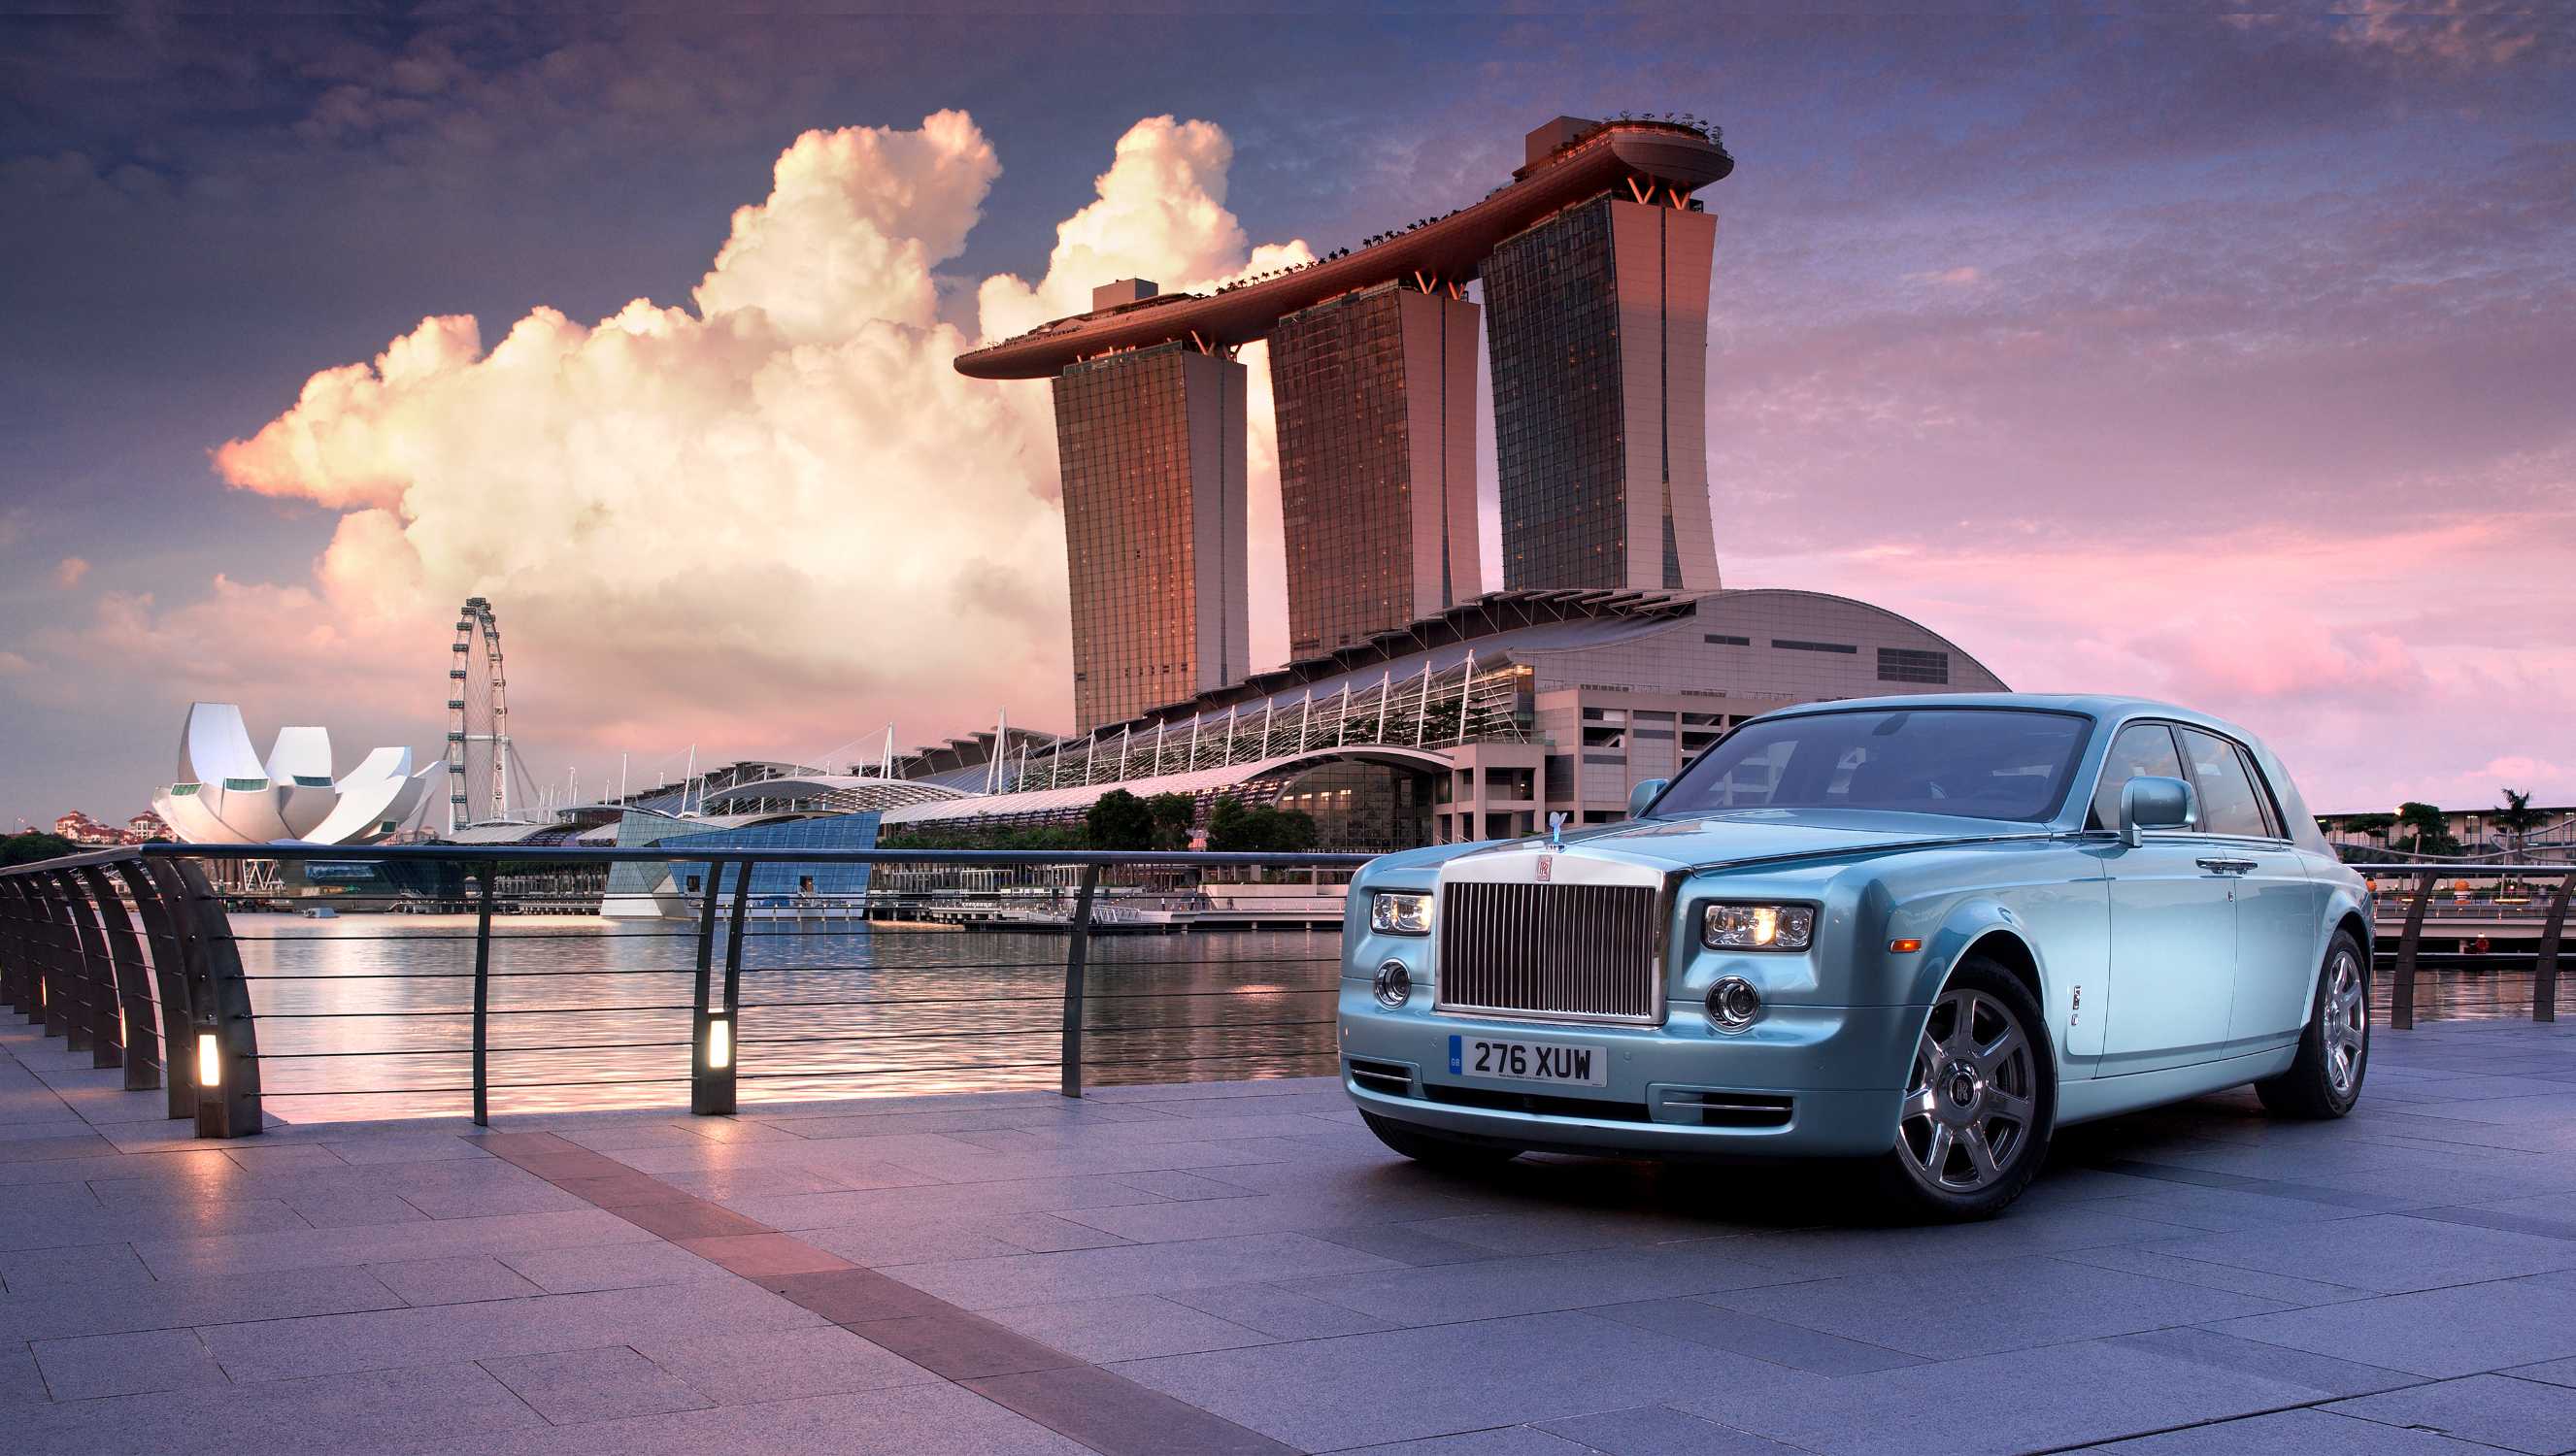 RollsRoyce Phantom review VIII is more than enough  Online Car  Marketplace for Used  New Cars